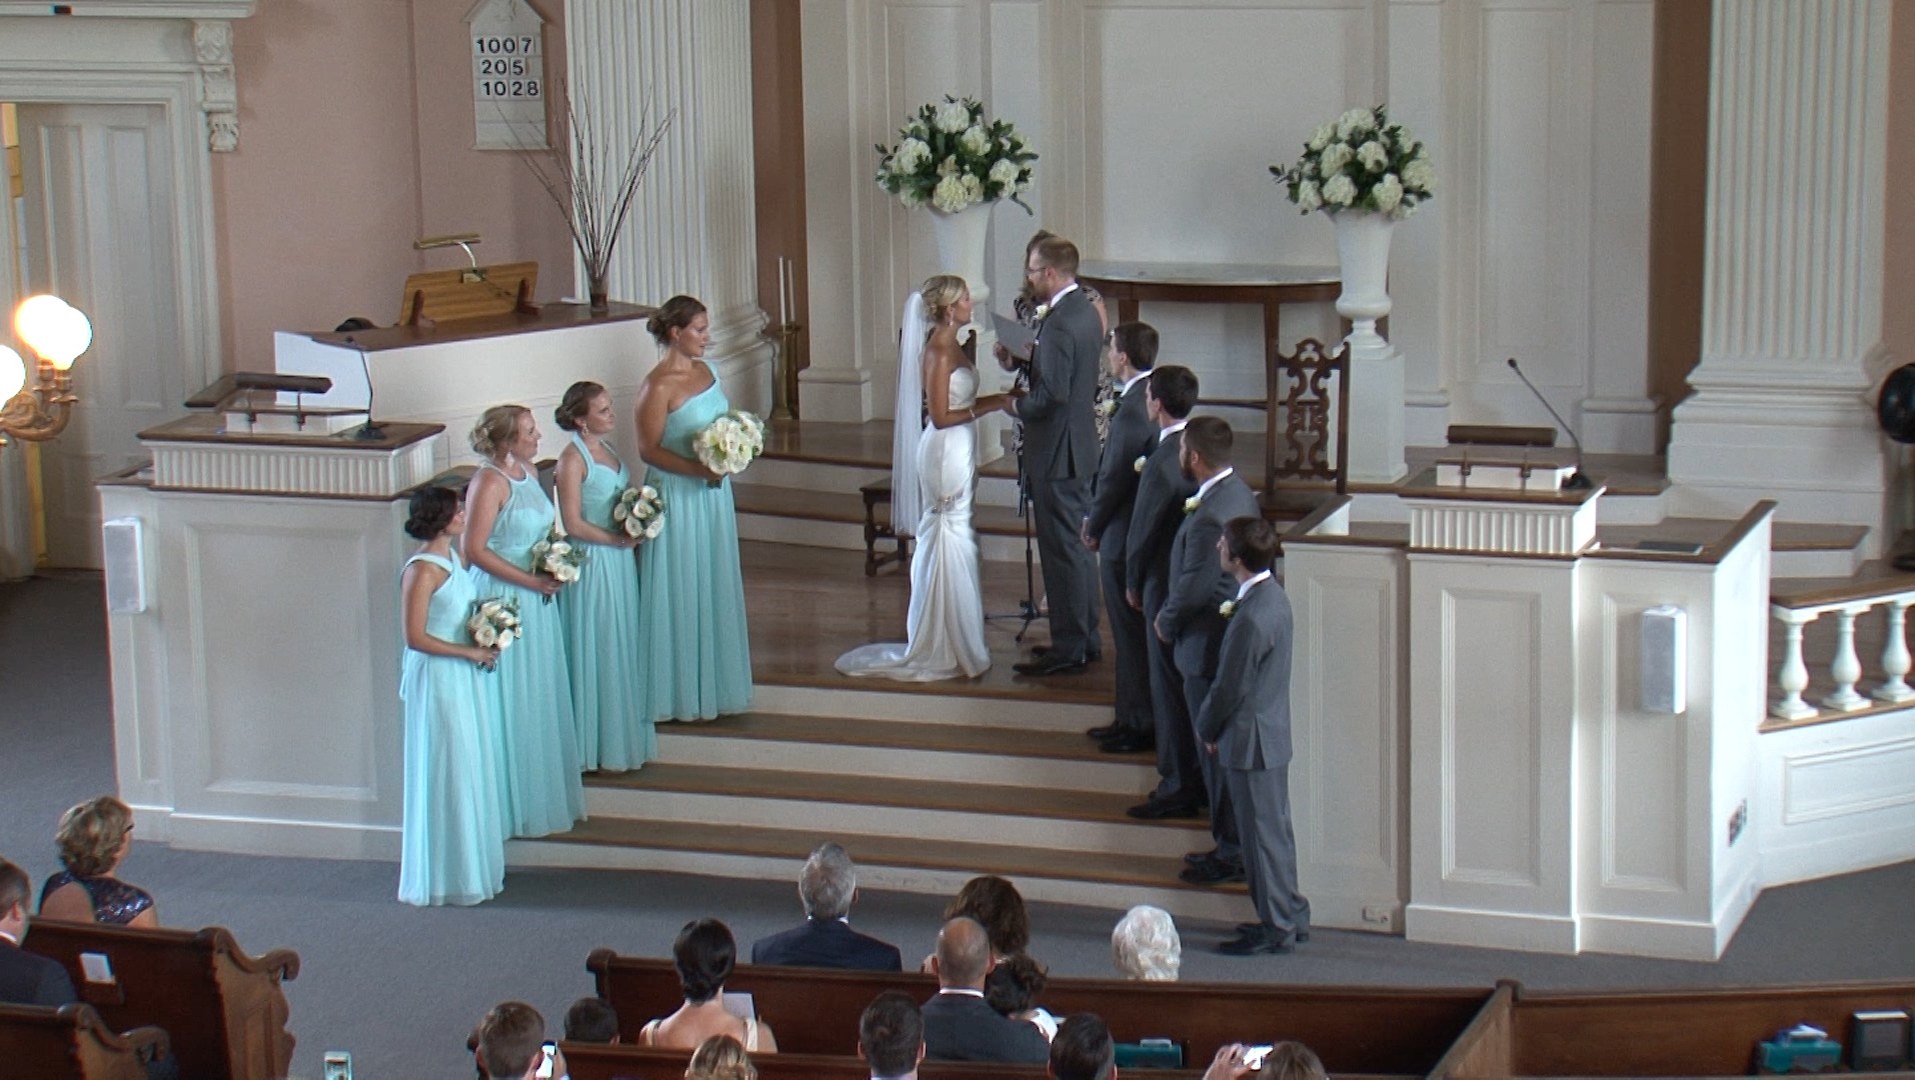 Wedding party on the alter in a still from their wedding video